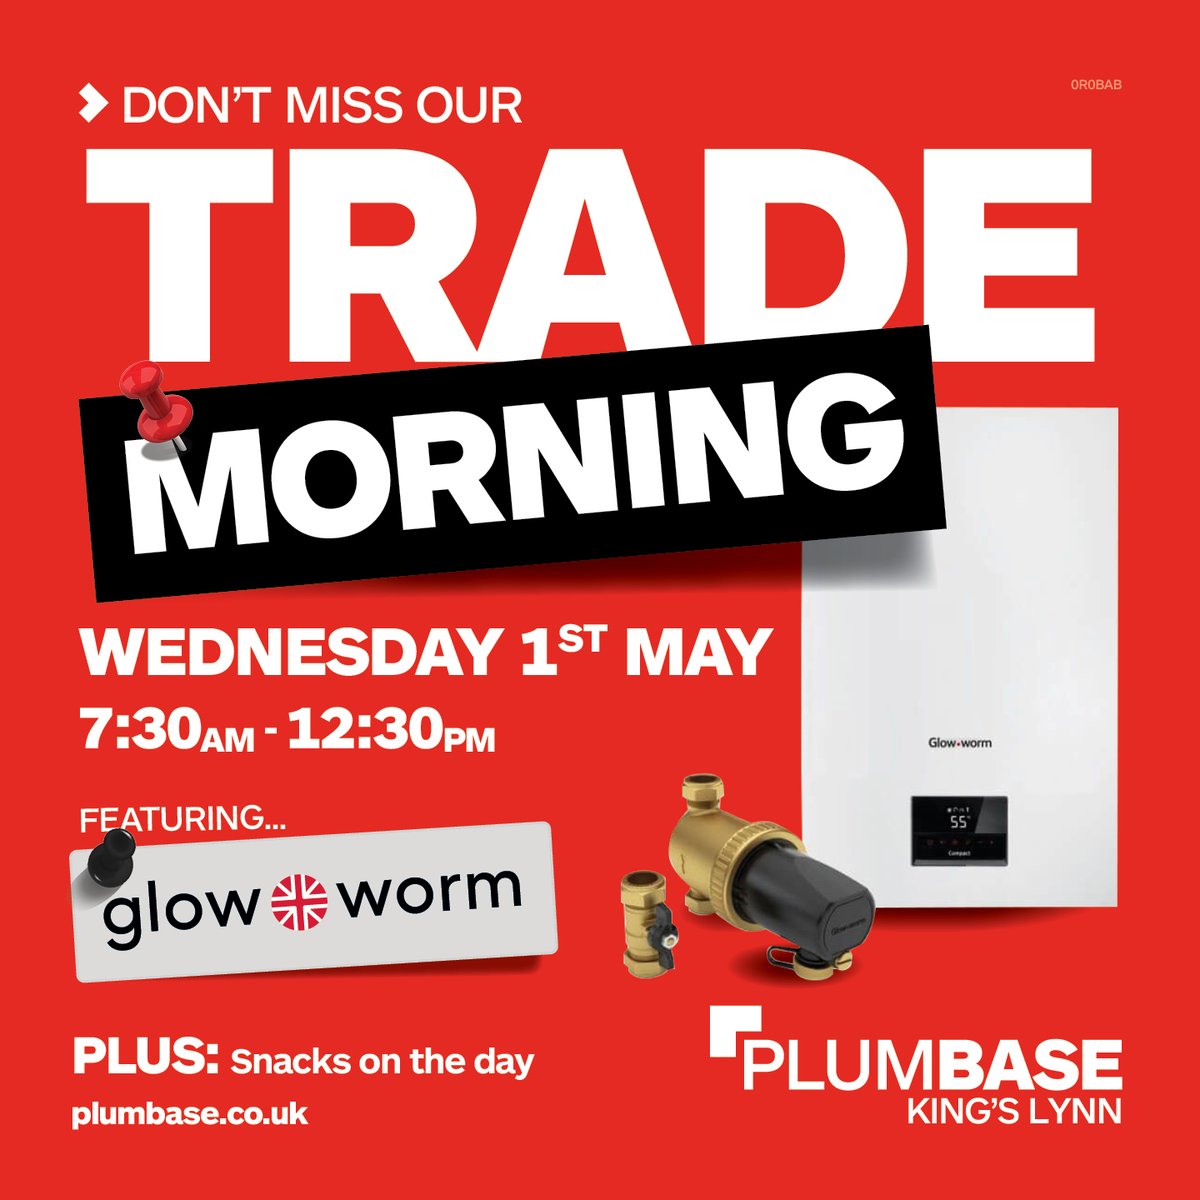 Angela from Glow•Worm will be hosting a Trade Morning at @PLUMBASEKL on Wednesday 1st May between 7:30am-12:30pm. Angela will be on hand to give you all the latest news and information and answer all your questions. #boilers #heating #glowworm #plumbers